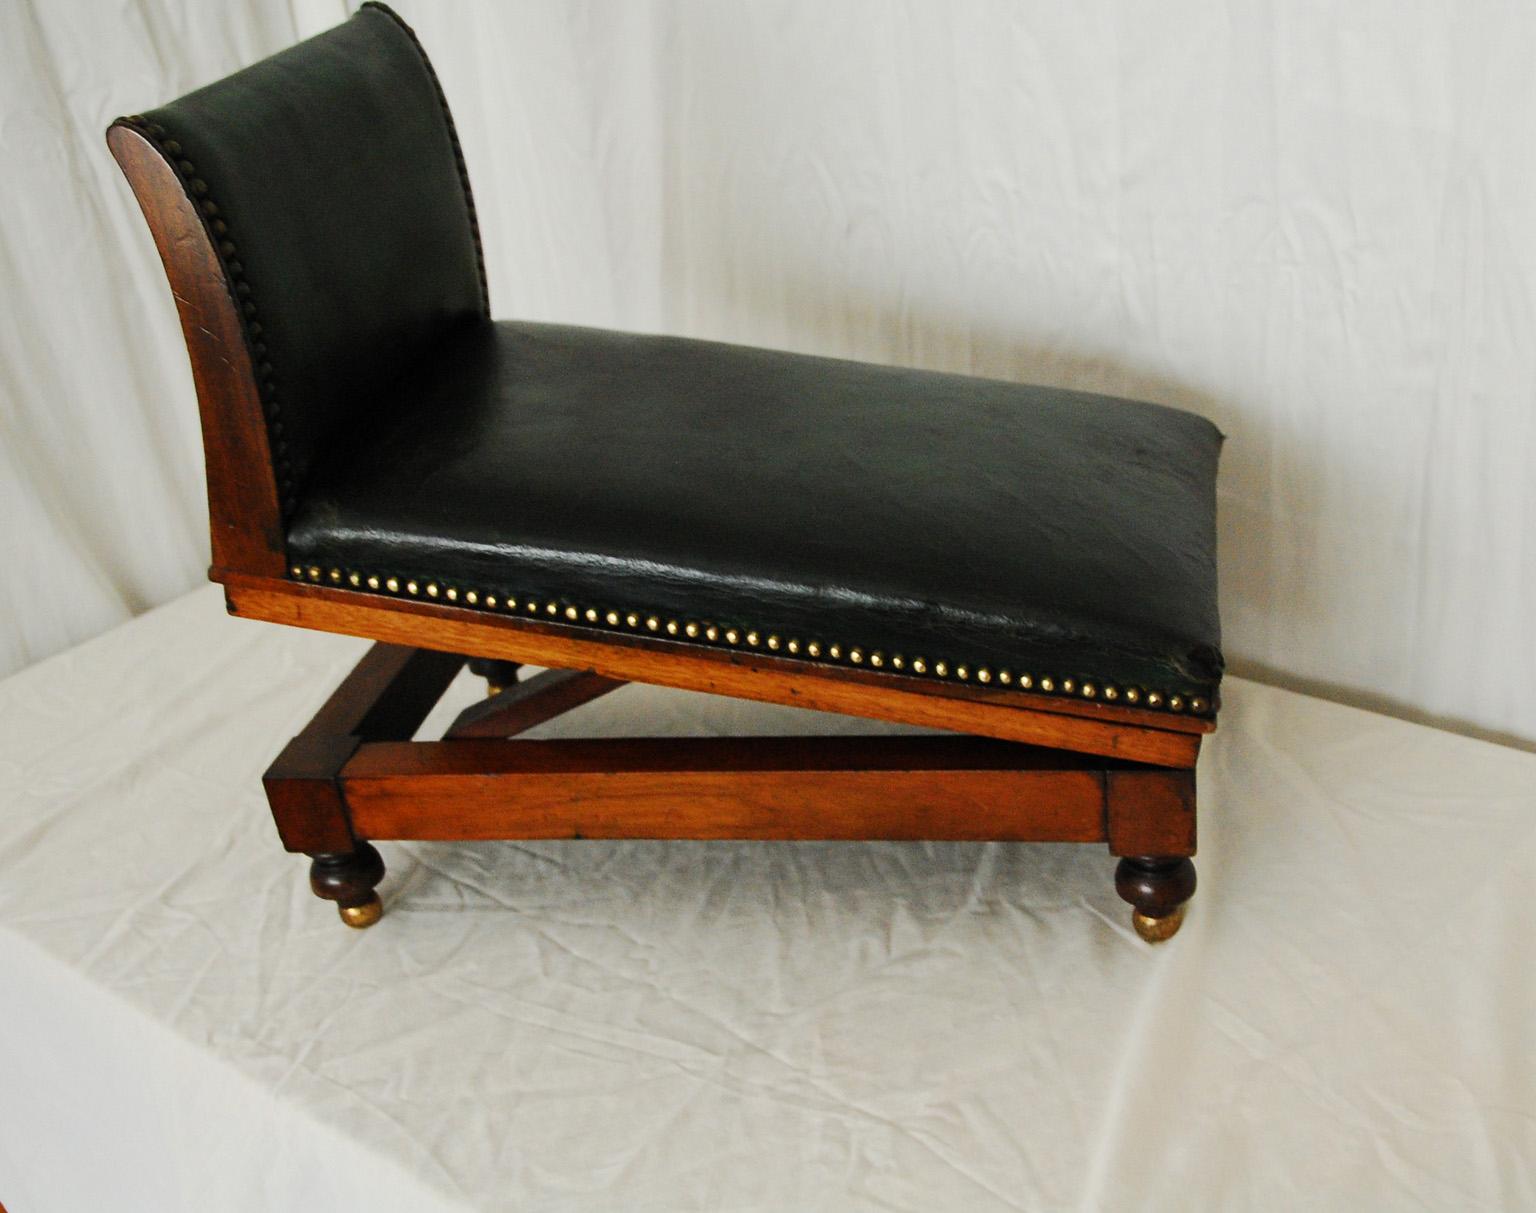 19th Century English Regency Mahogany Adjustable Gout Stool with Old Leather Upholstery